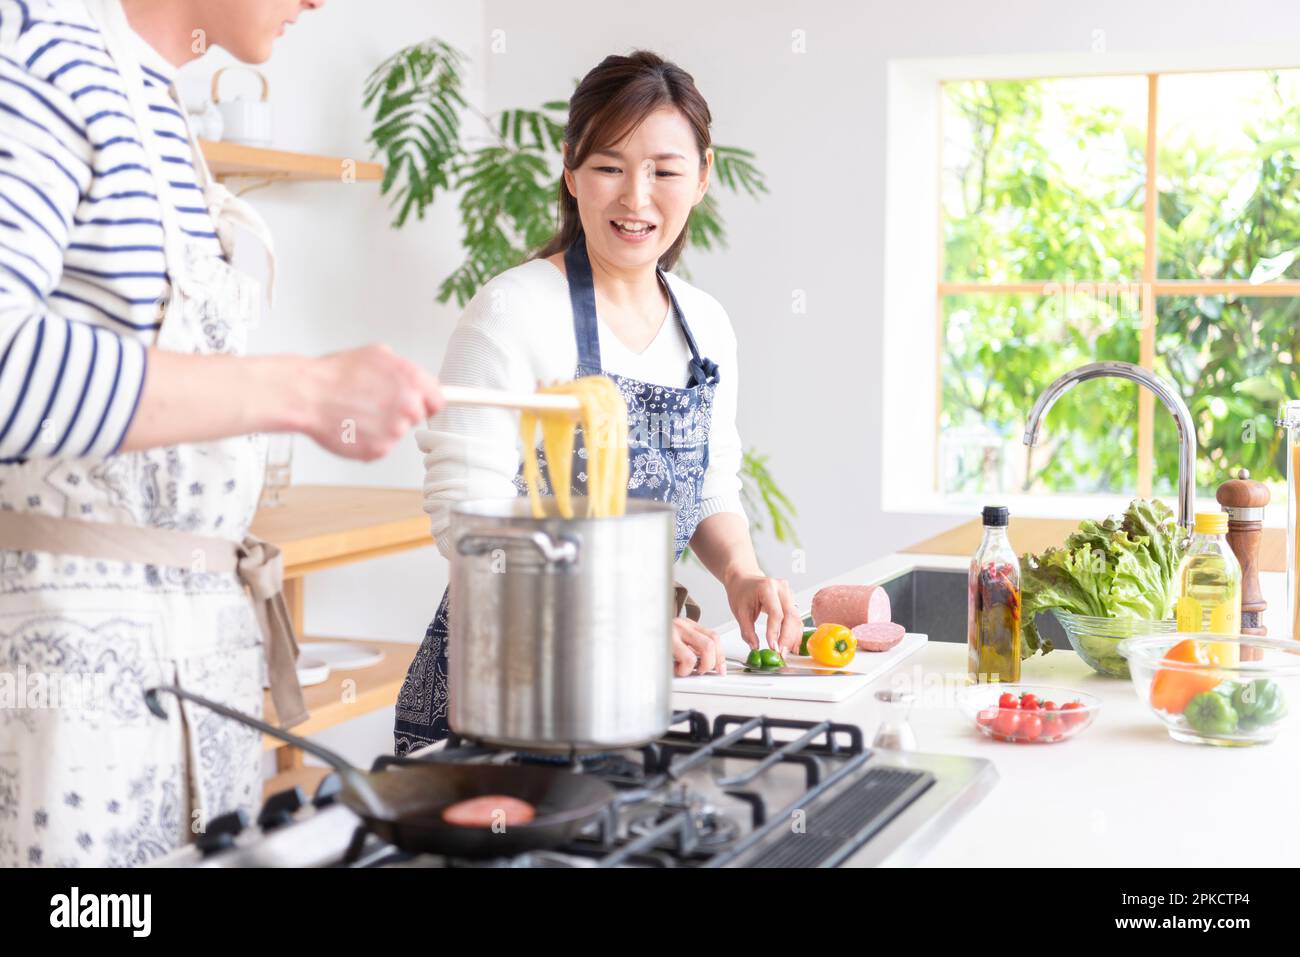 A couple in their 30s cooking in the kitchen Stock Photo